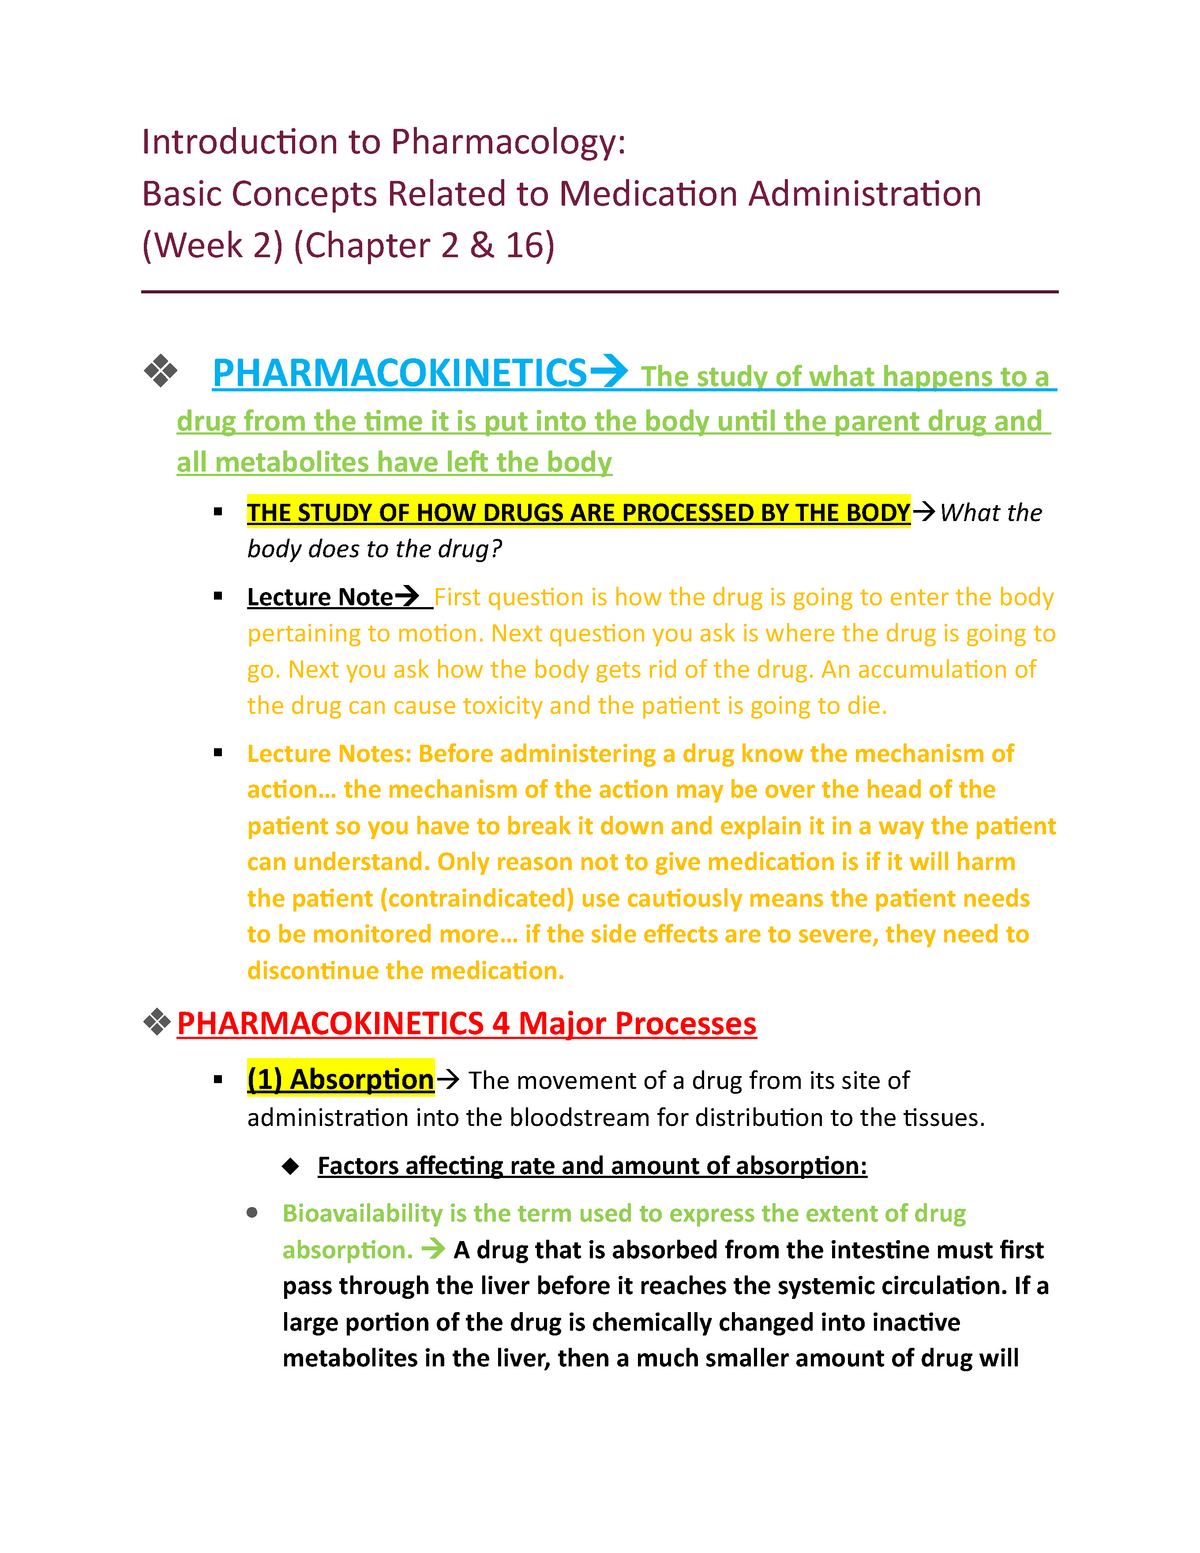 pharmacology essay questions and answers